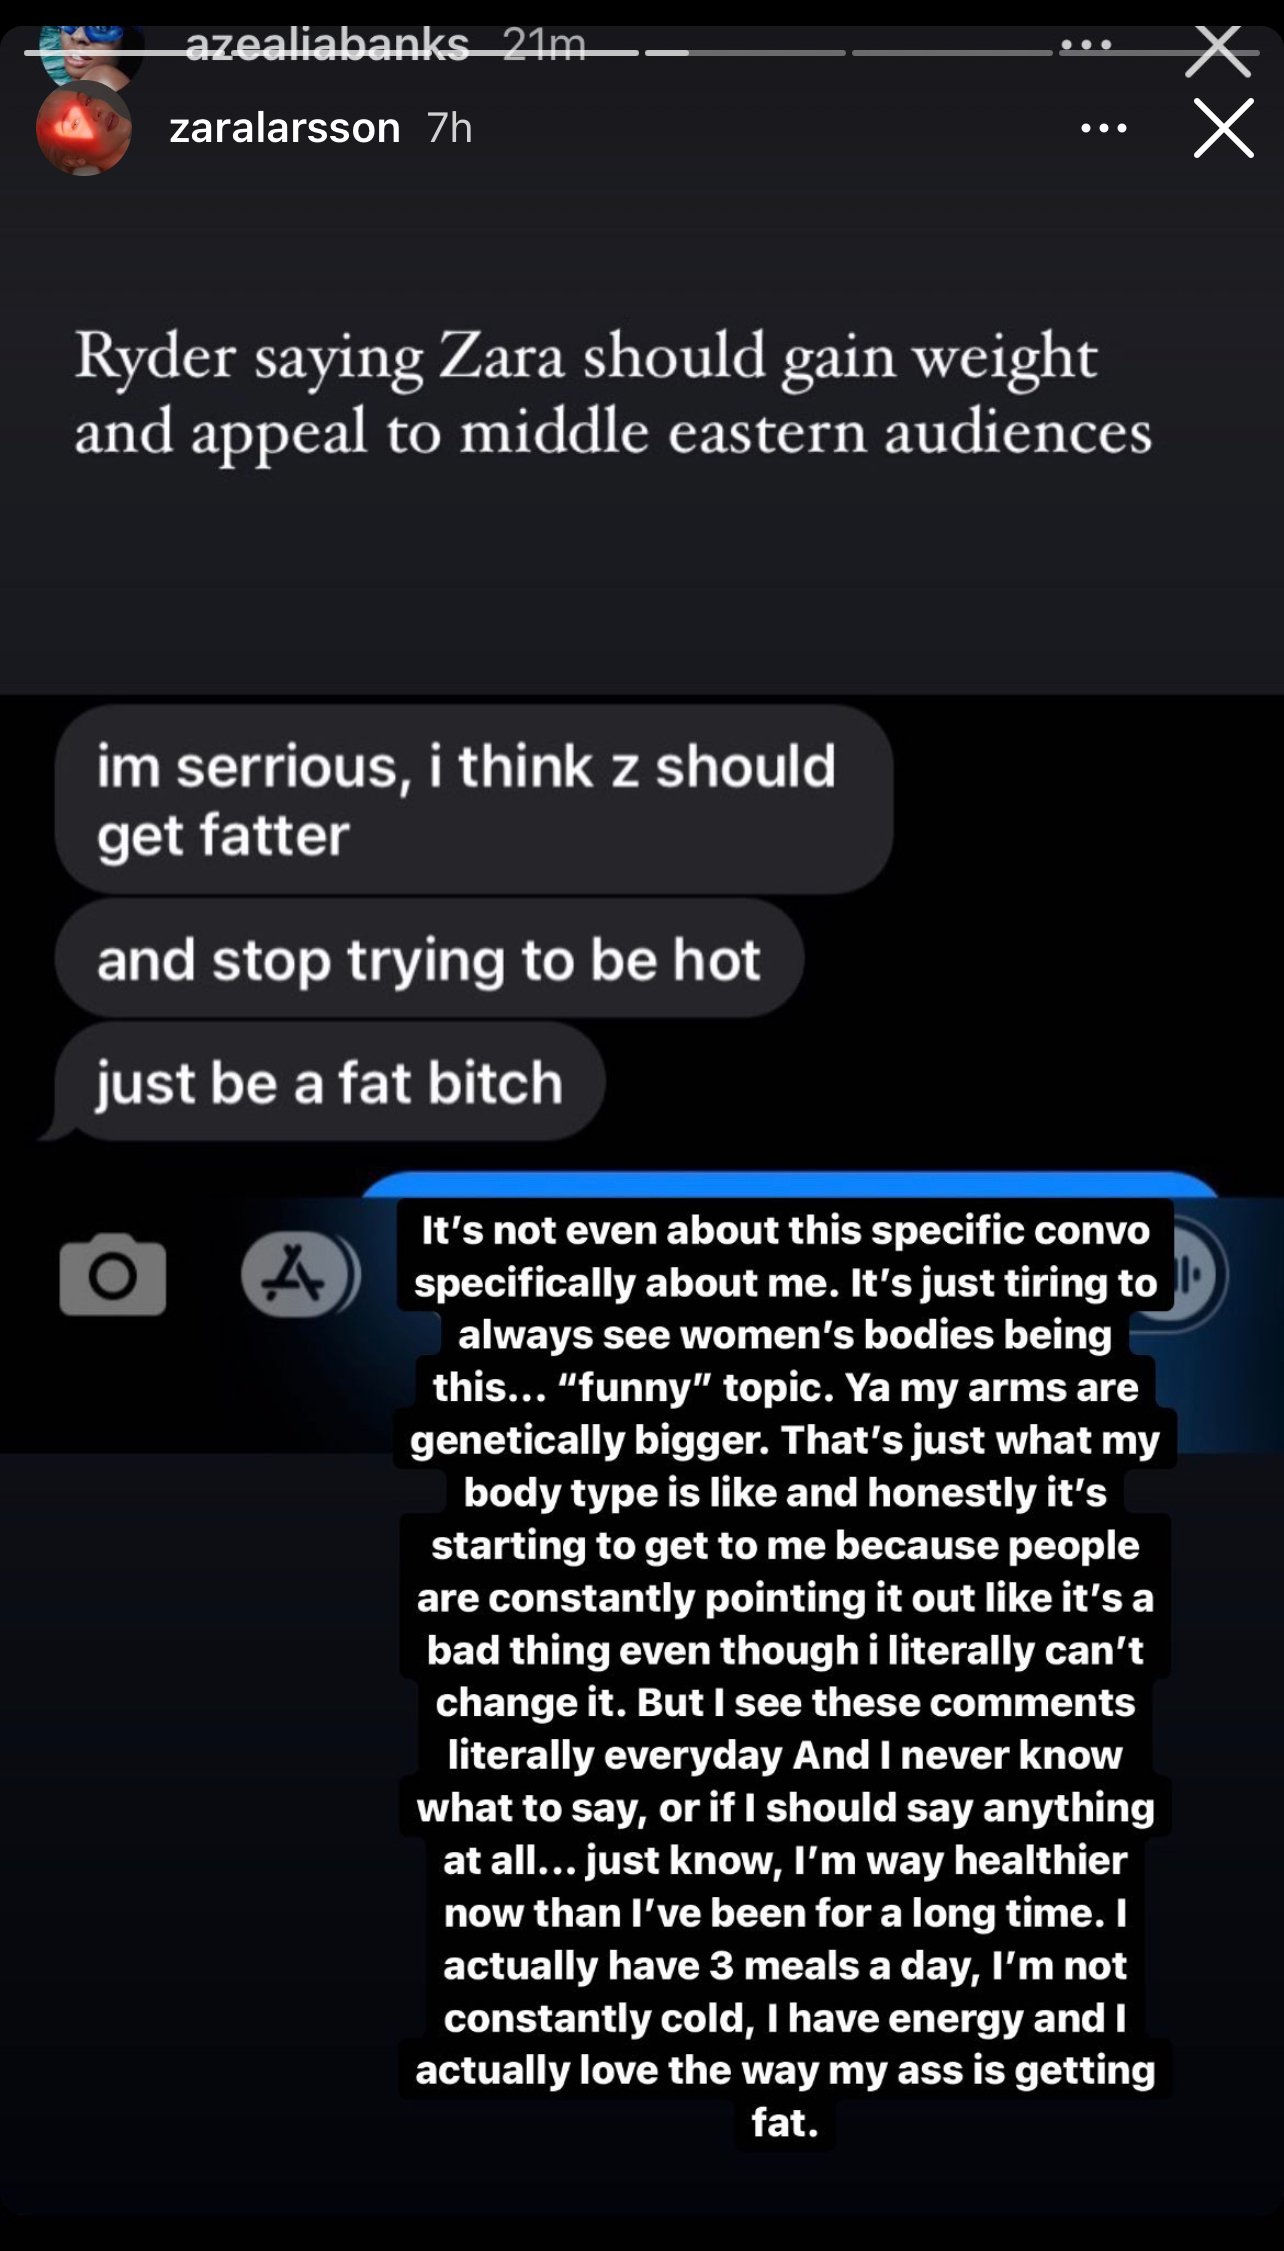 Azealia Banks: Ryder saying Zara should gain weight and appeal to middle eastern audiences. Ryders comment: Im serious, i think Z should get fatter. and stop trying to be hot. Just be at fat bitch. Zaras comment: It's not even about this specific convo specifically about me. It's just tiring to always see women bodies being this "funny2 topic. Ya, ma arms are genetically bigger. That's just like what my body type is like and honestlyit's starting to get to me because people are constantly poiting it out like it's a bad thing even tho I literally can't change it. But I see these comments literally every day and I never know what to say, or if I should say anything at all. Just know that I am way healthier now that I've been for a long time, I actuallt have three meals a day, I'm not constantly cold, I have energy and I actually love the way my ass is getting fat.   